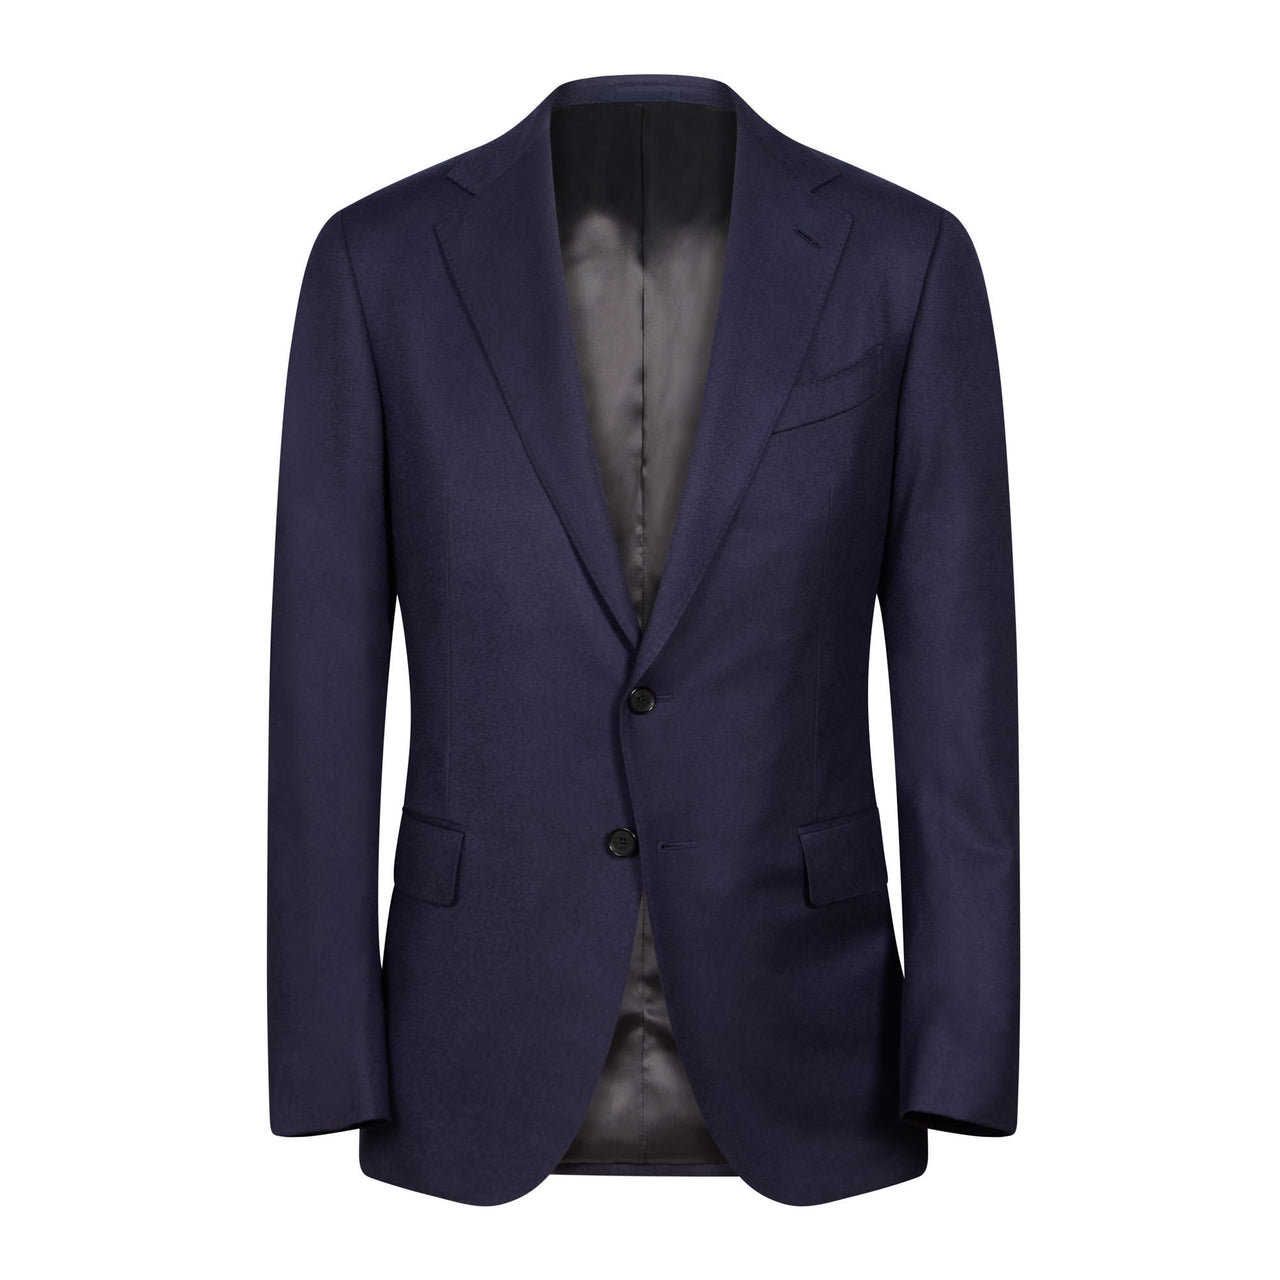 HENRY SARTORIAL X CARUSO Norma 2 Button Single Breasted Jacket NAVY MELANGE